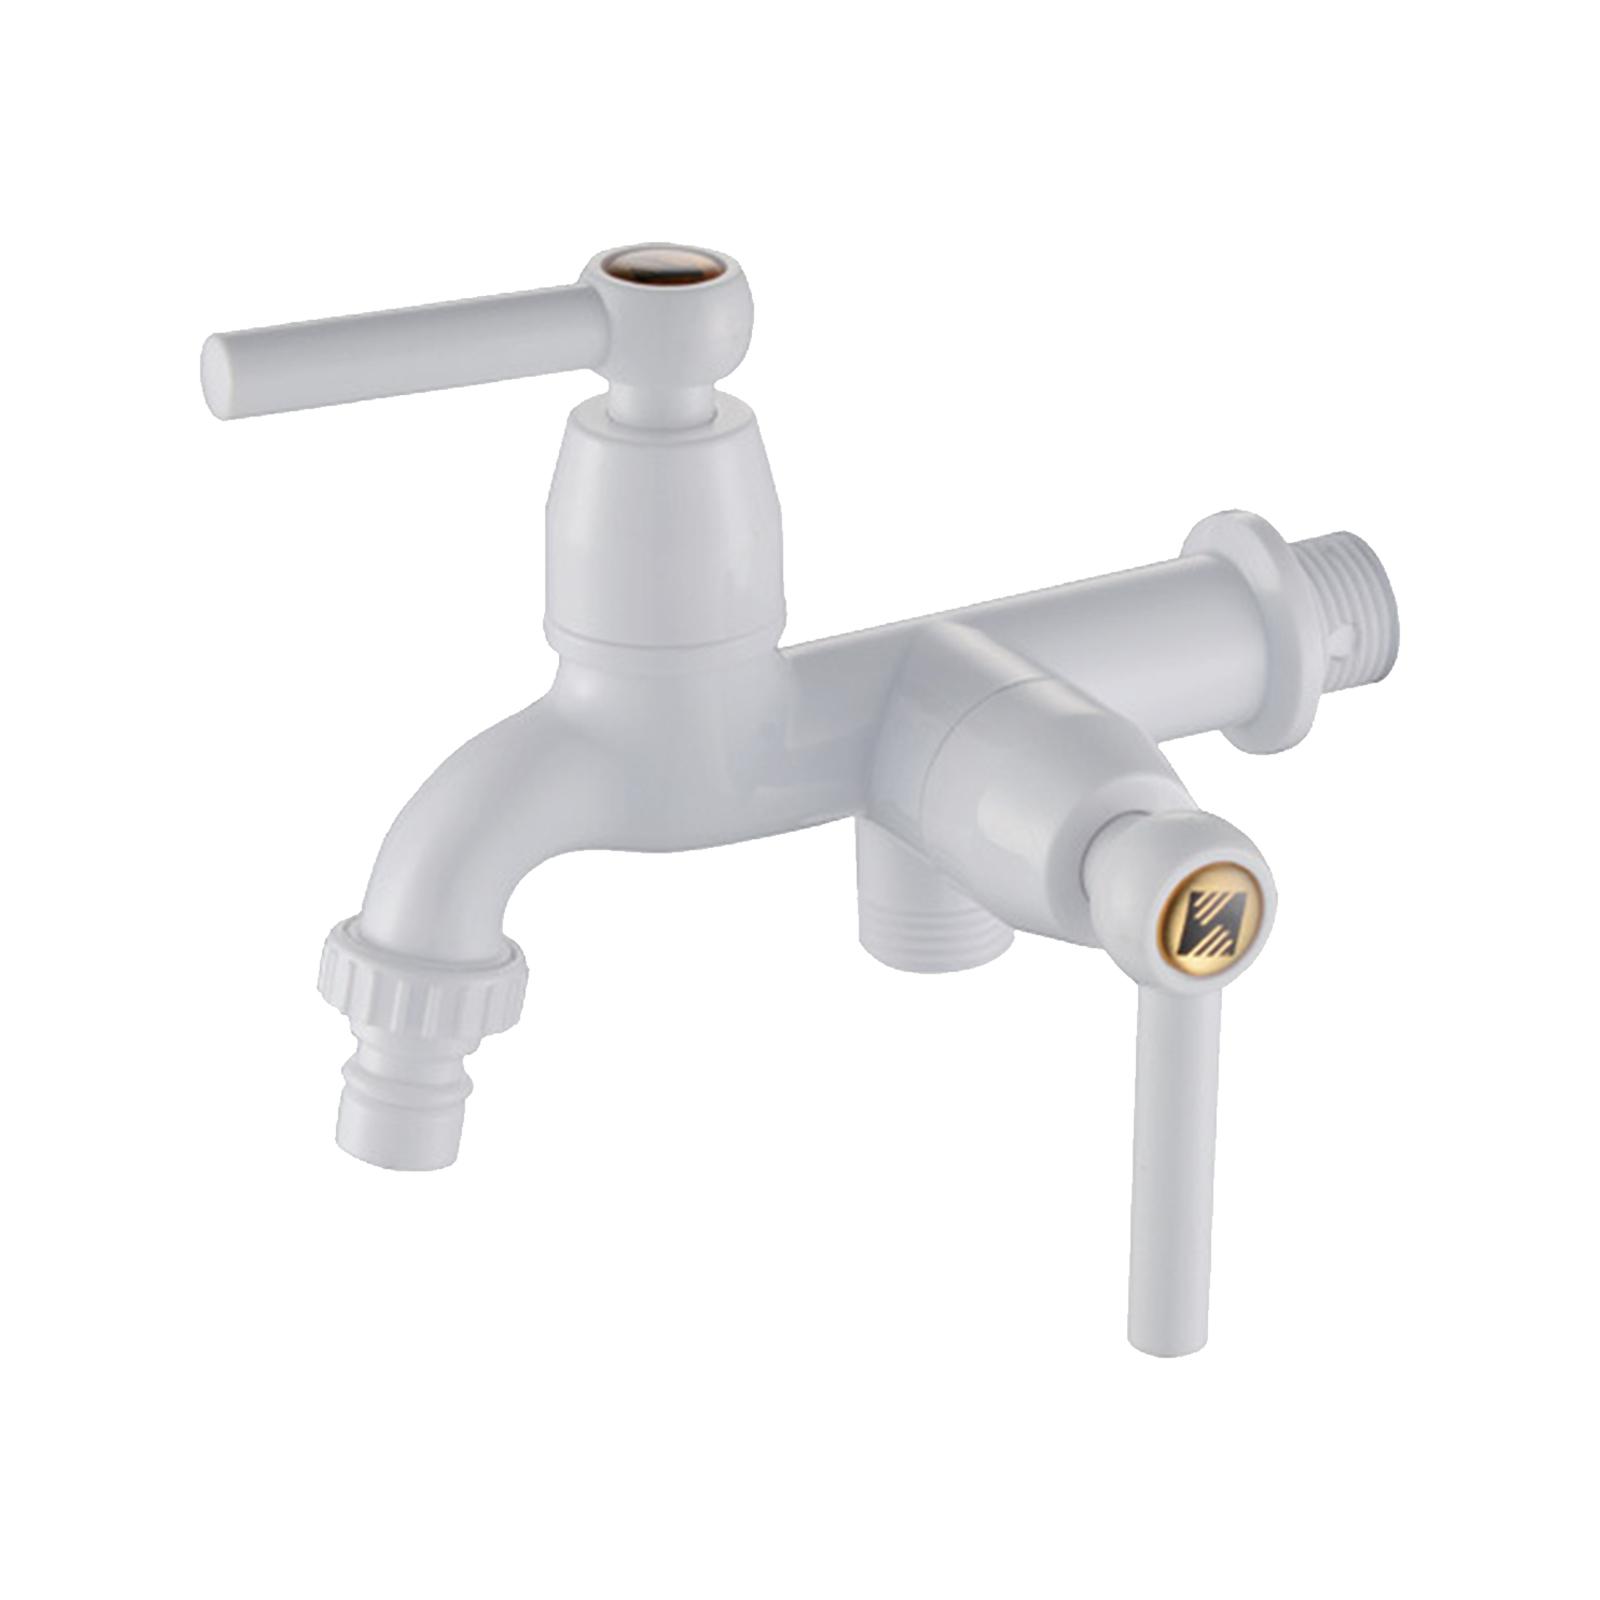 Washing Machine Water Faucet Outlet Valve Garden Tap for Home Garden Style D